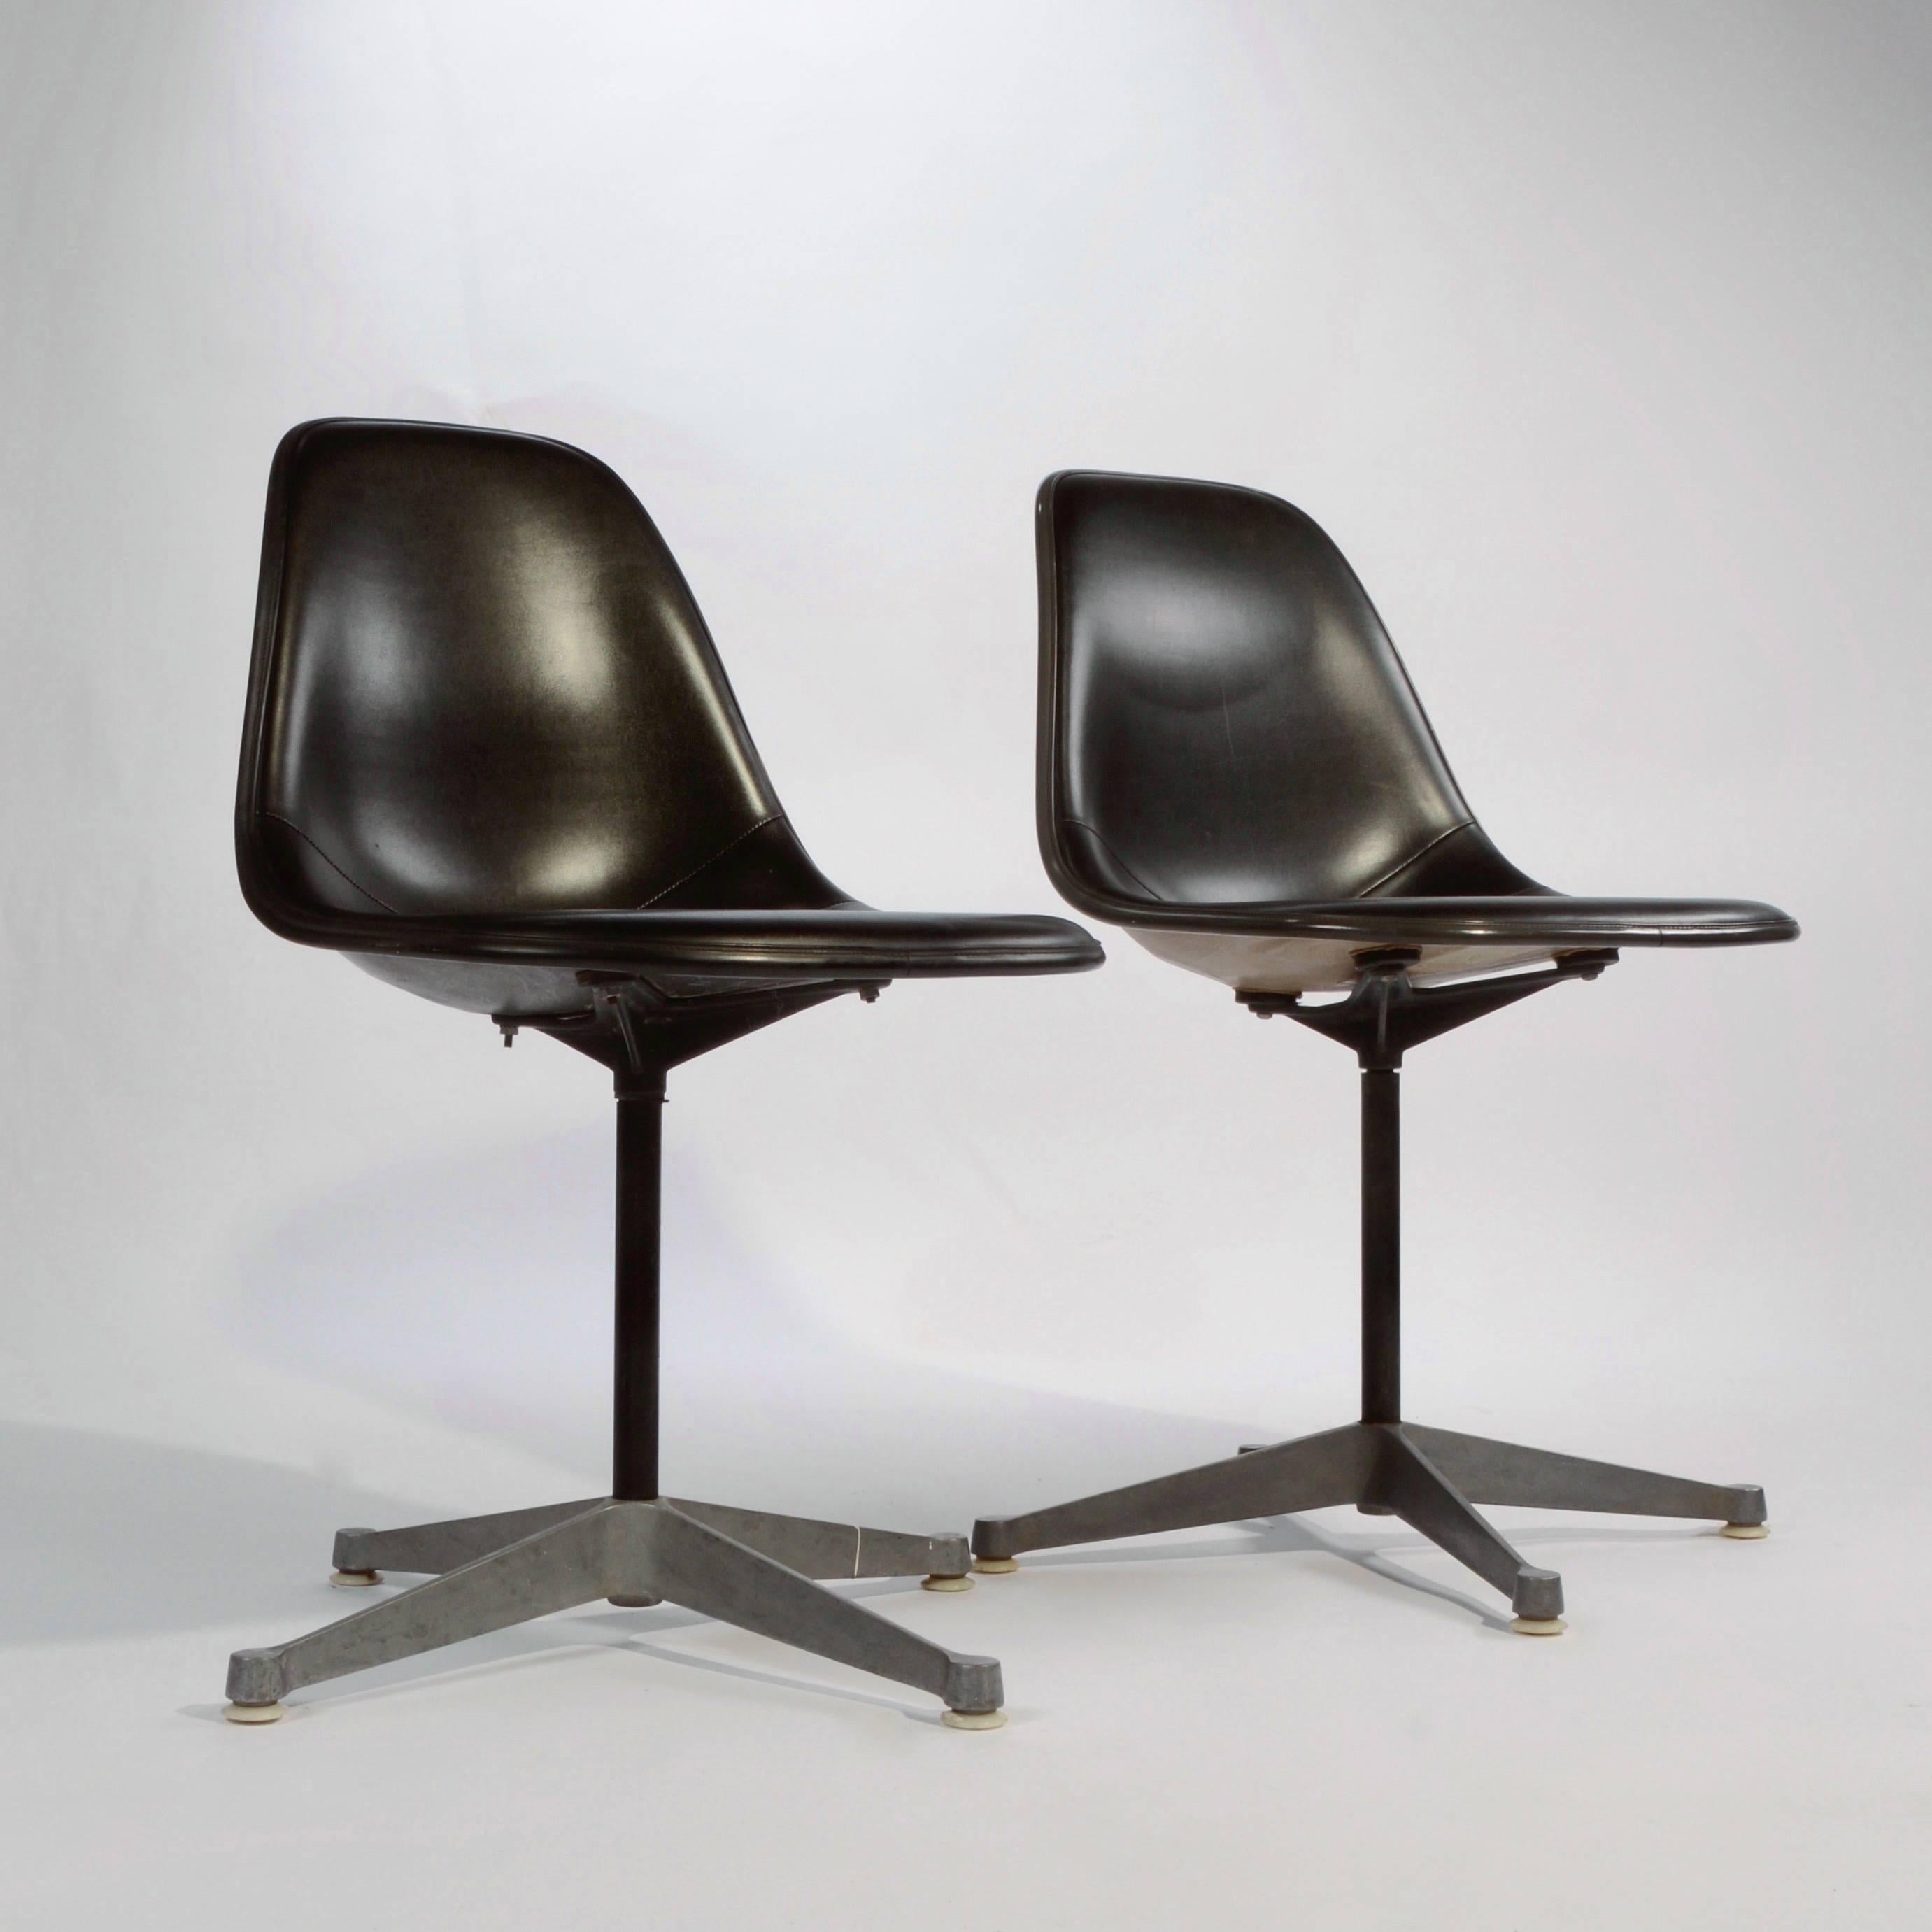 Pair of Herman Miller Eames chairs on aluminium contract swivel base. Shells are in good vintage condition and are upholstered in black vinyl.